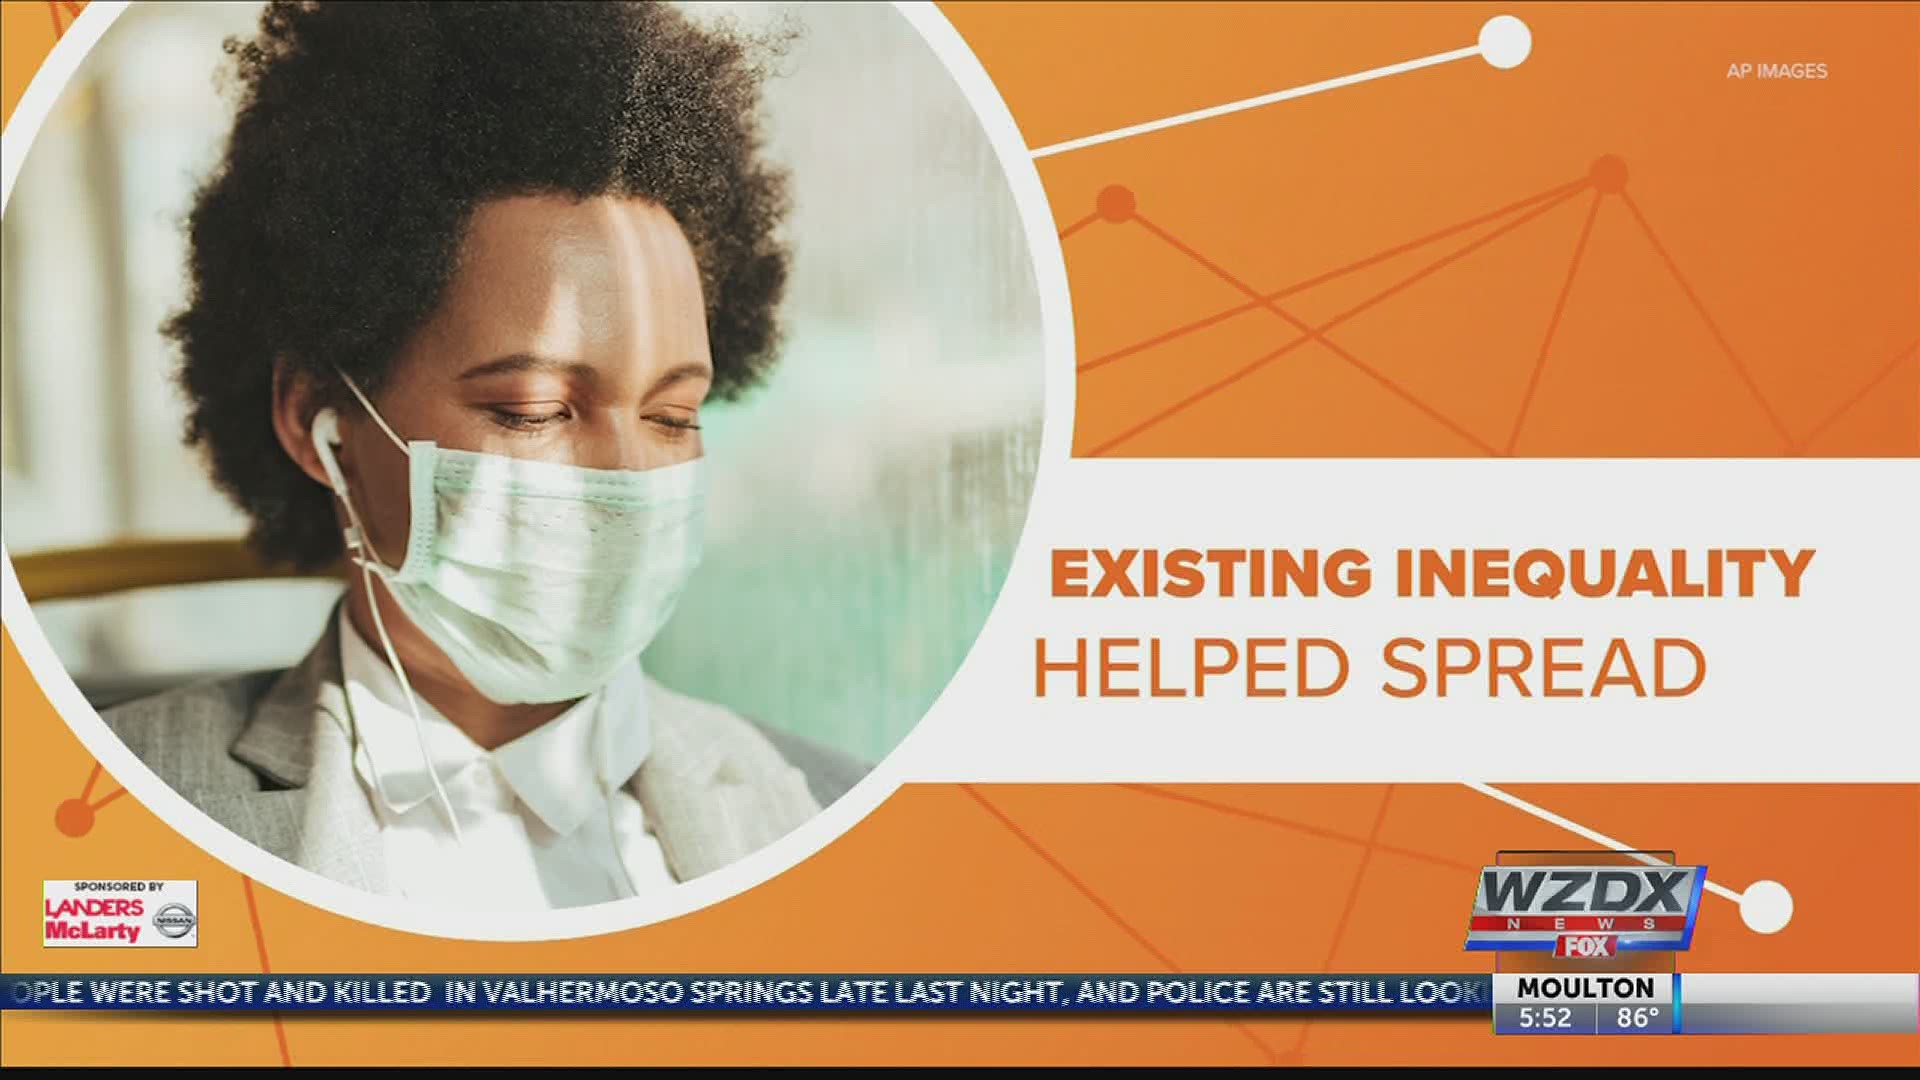 As COVID-19 spread across the U.S., health officials and leaders started noticing a disturbing trend as the virus took larger toll on African Americans.